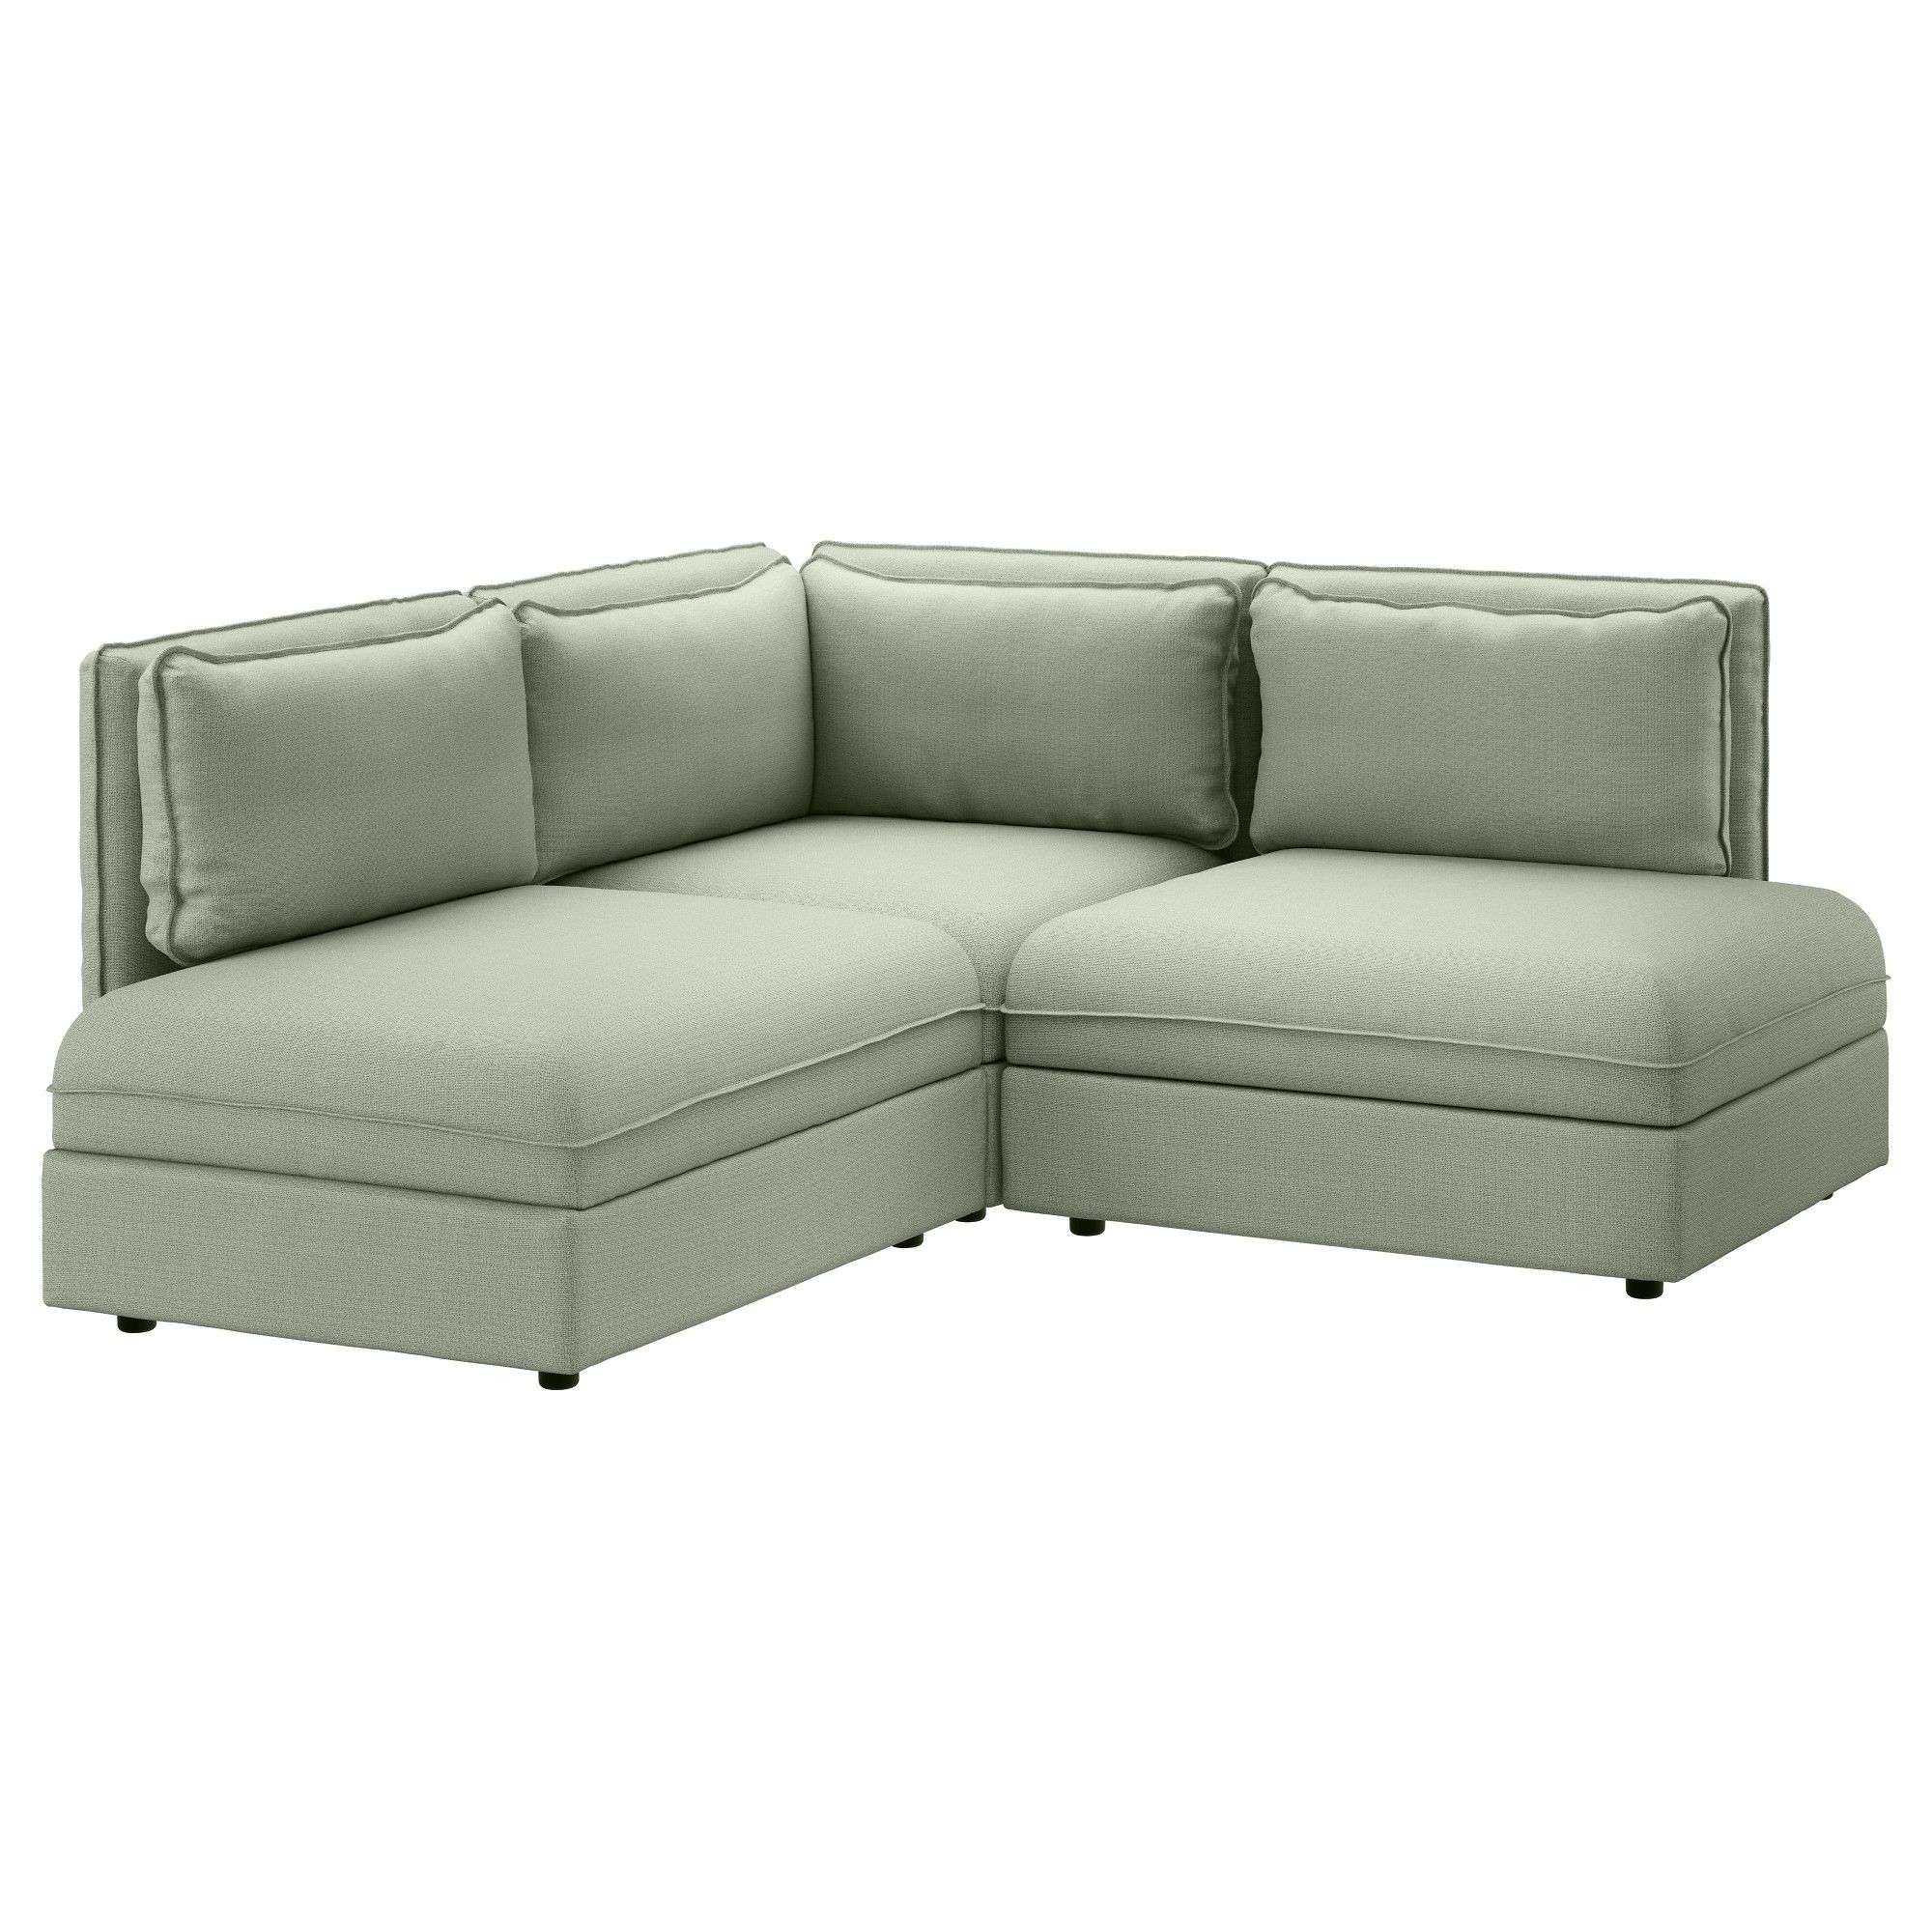 Luxury Sectional Sofas Ikea 94 Sofas And Couches Ideas With Inside Sectional Sofas At Ikea (View 4 of 15)